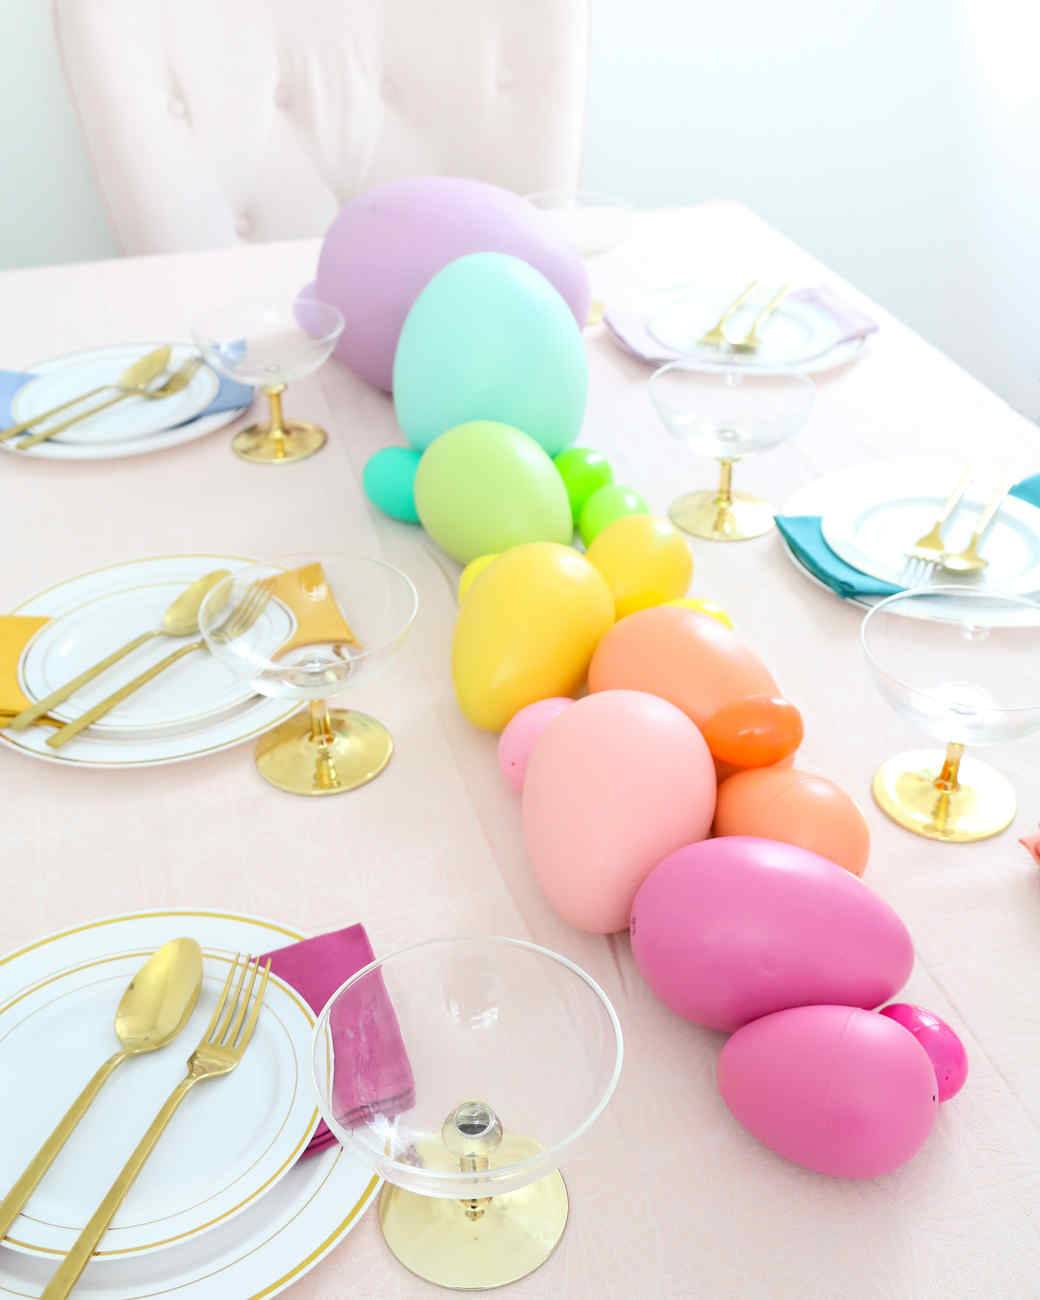 Colorful centerpiece for Easter (from Marta Steward)